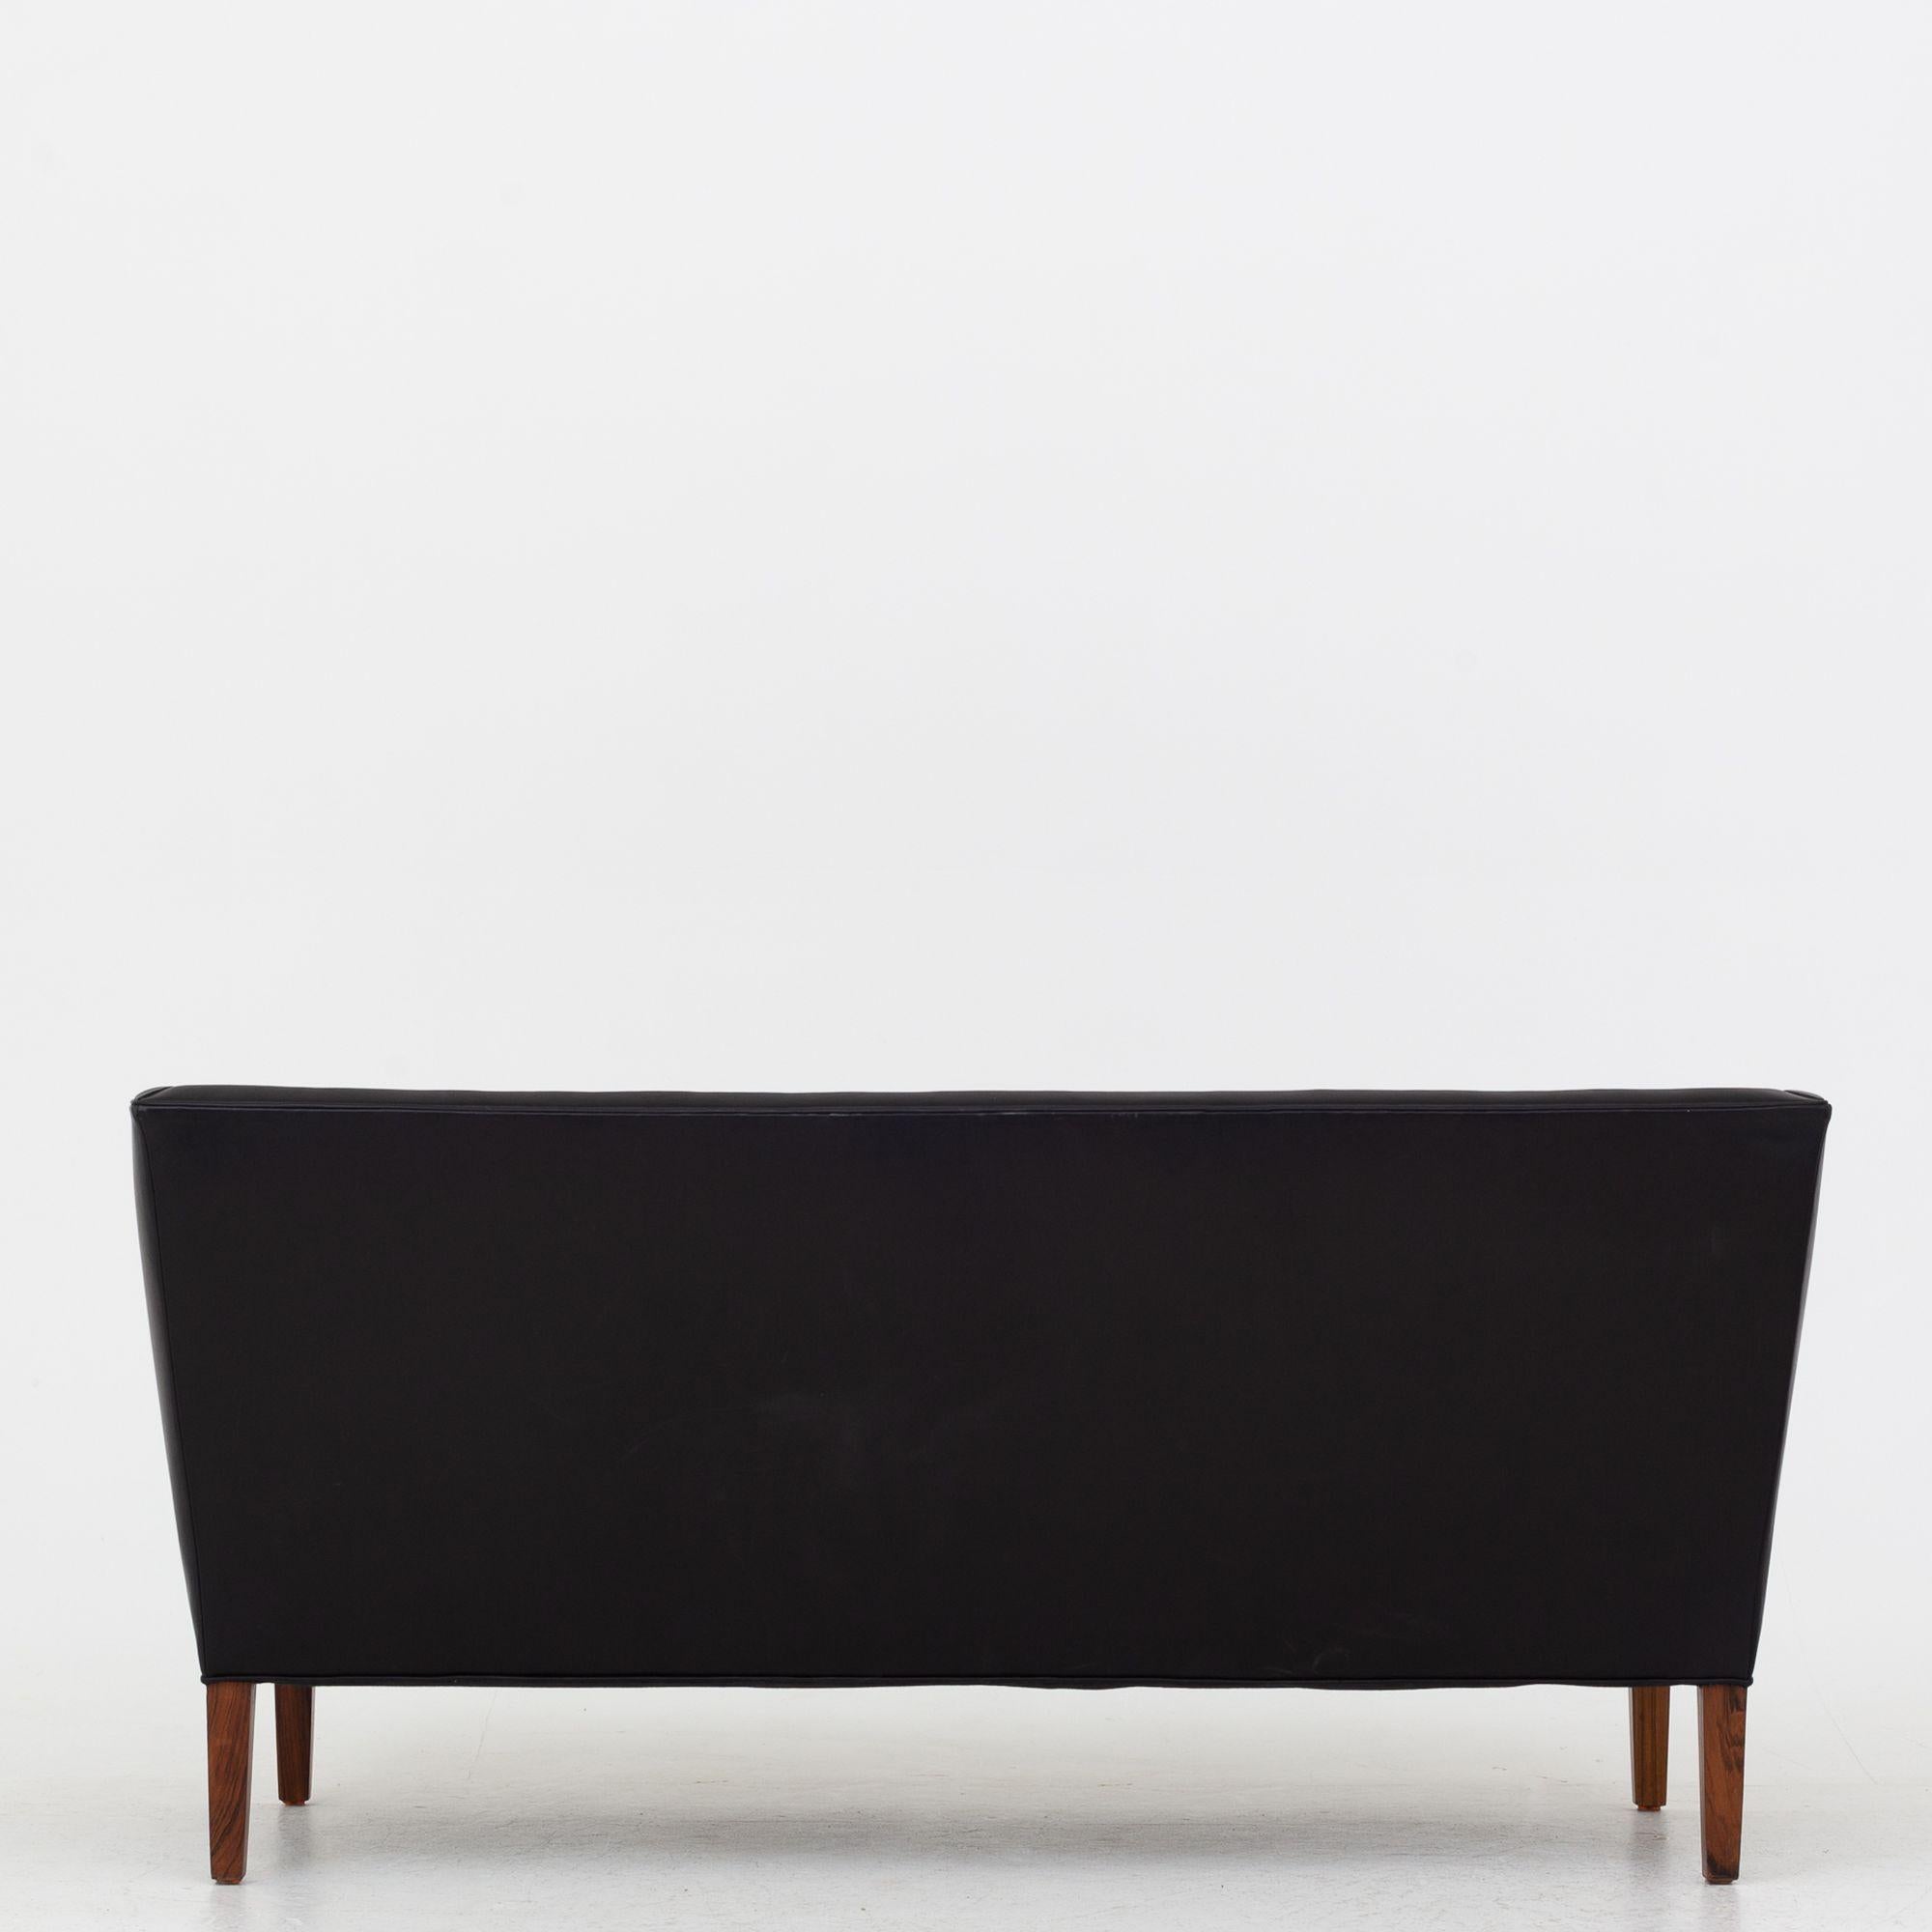 2-Seater sofa in black leather and legs in rosewood. Grete Jalk / Johannes Hansen.